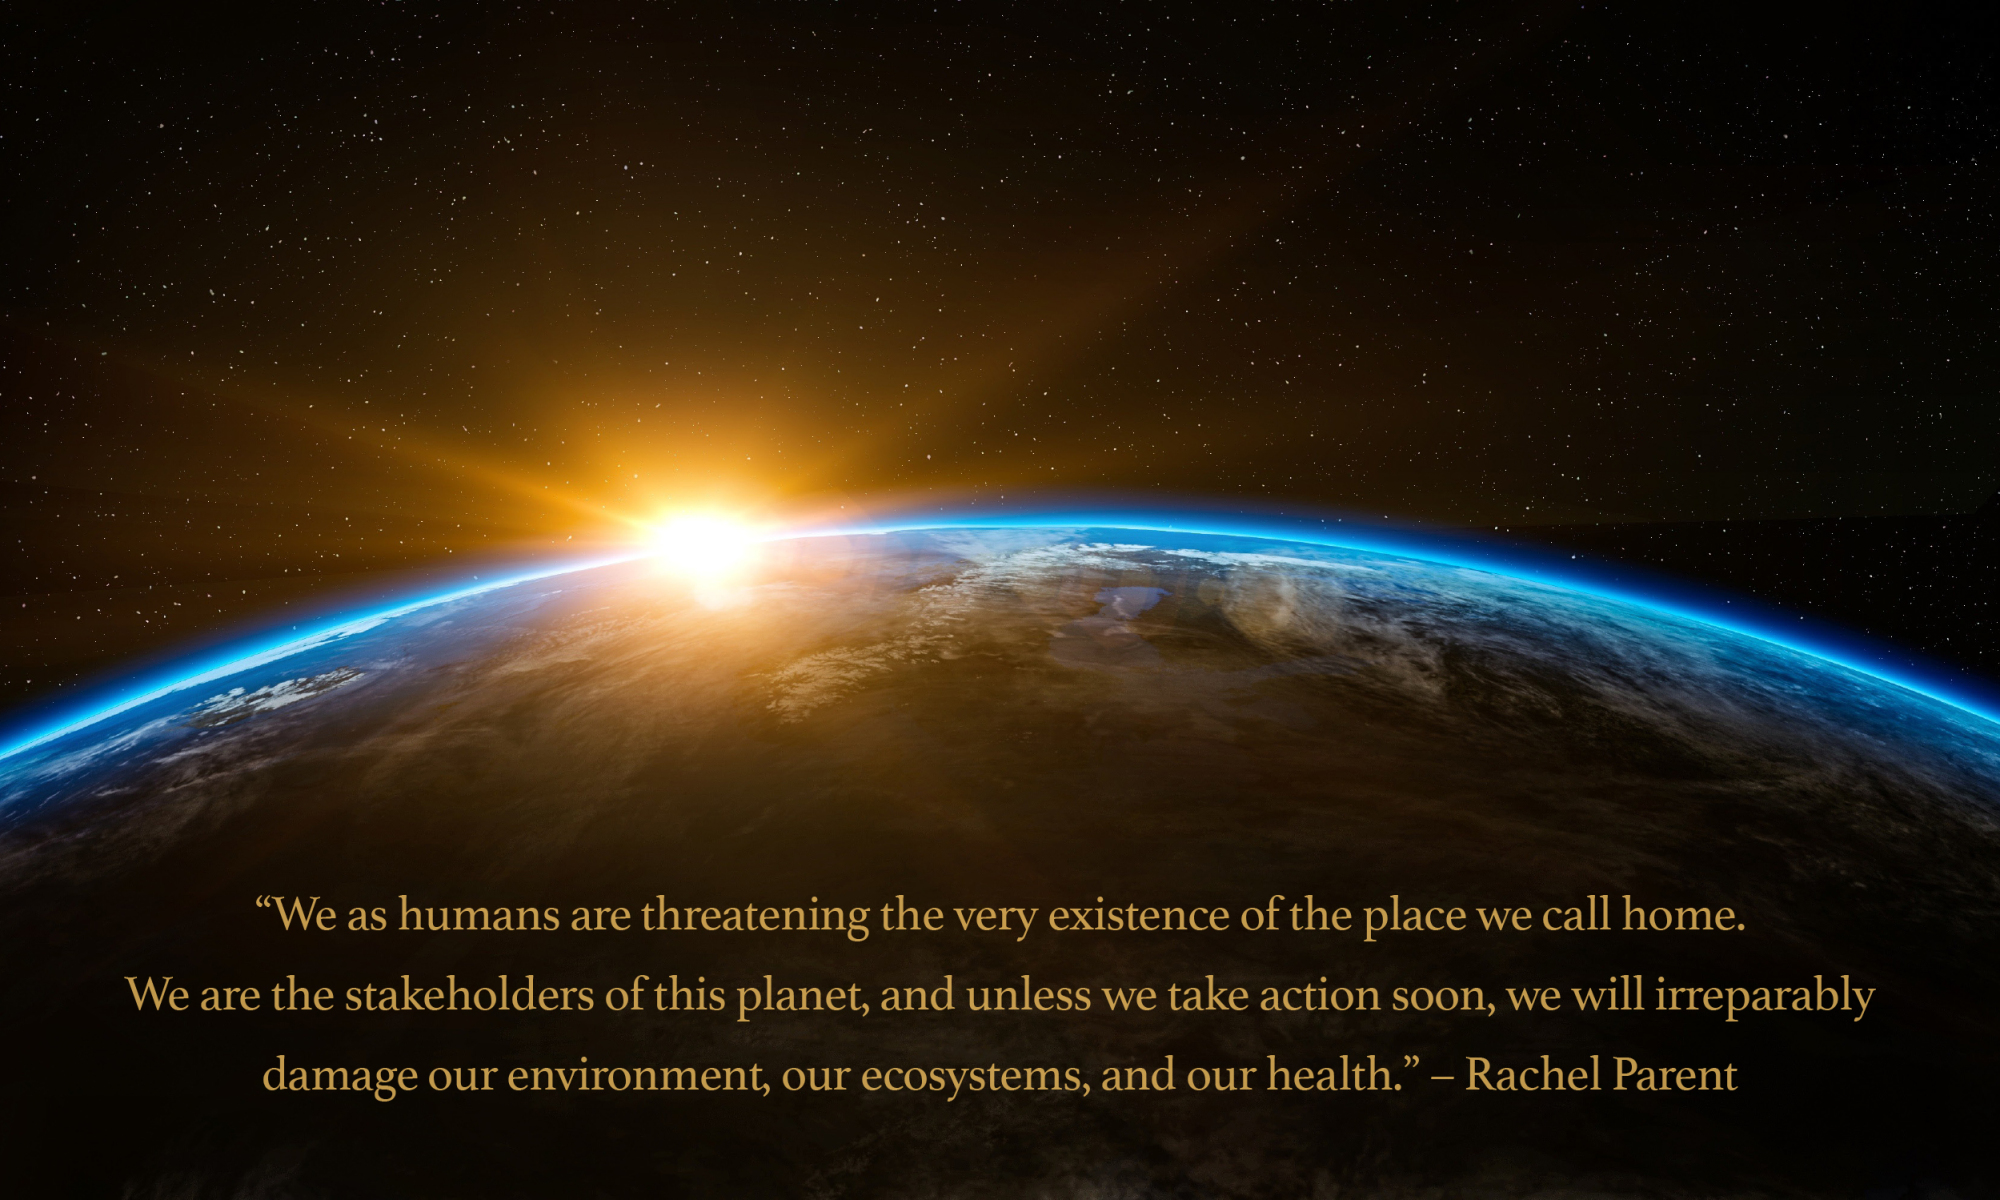 Like youth environmental activist Greta Thunberg, since the age of 11, GMO labeling advocate Rachel Parent has been passionately advocating for a healthier & more sustainable world so that she and future generations to follow will have a planet to inherit & safely inhabit.